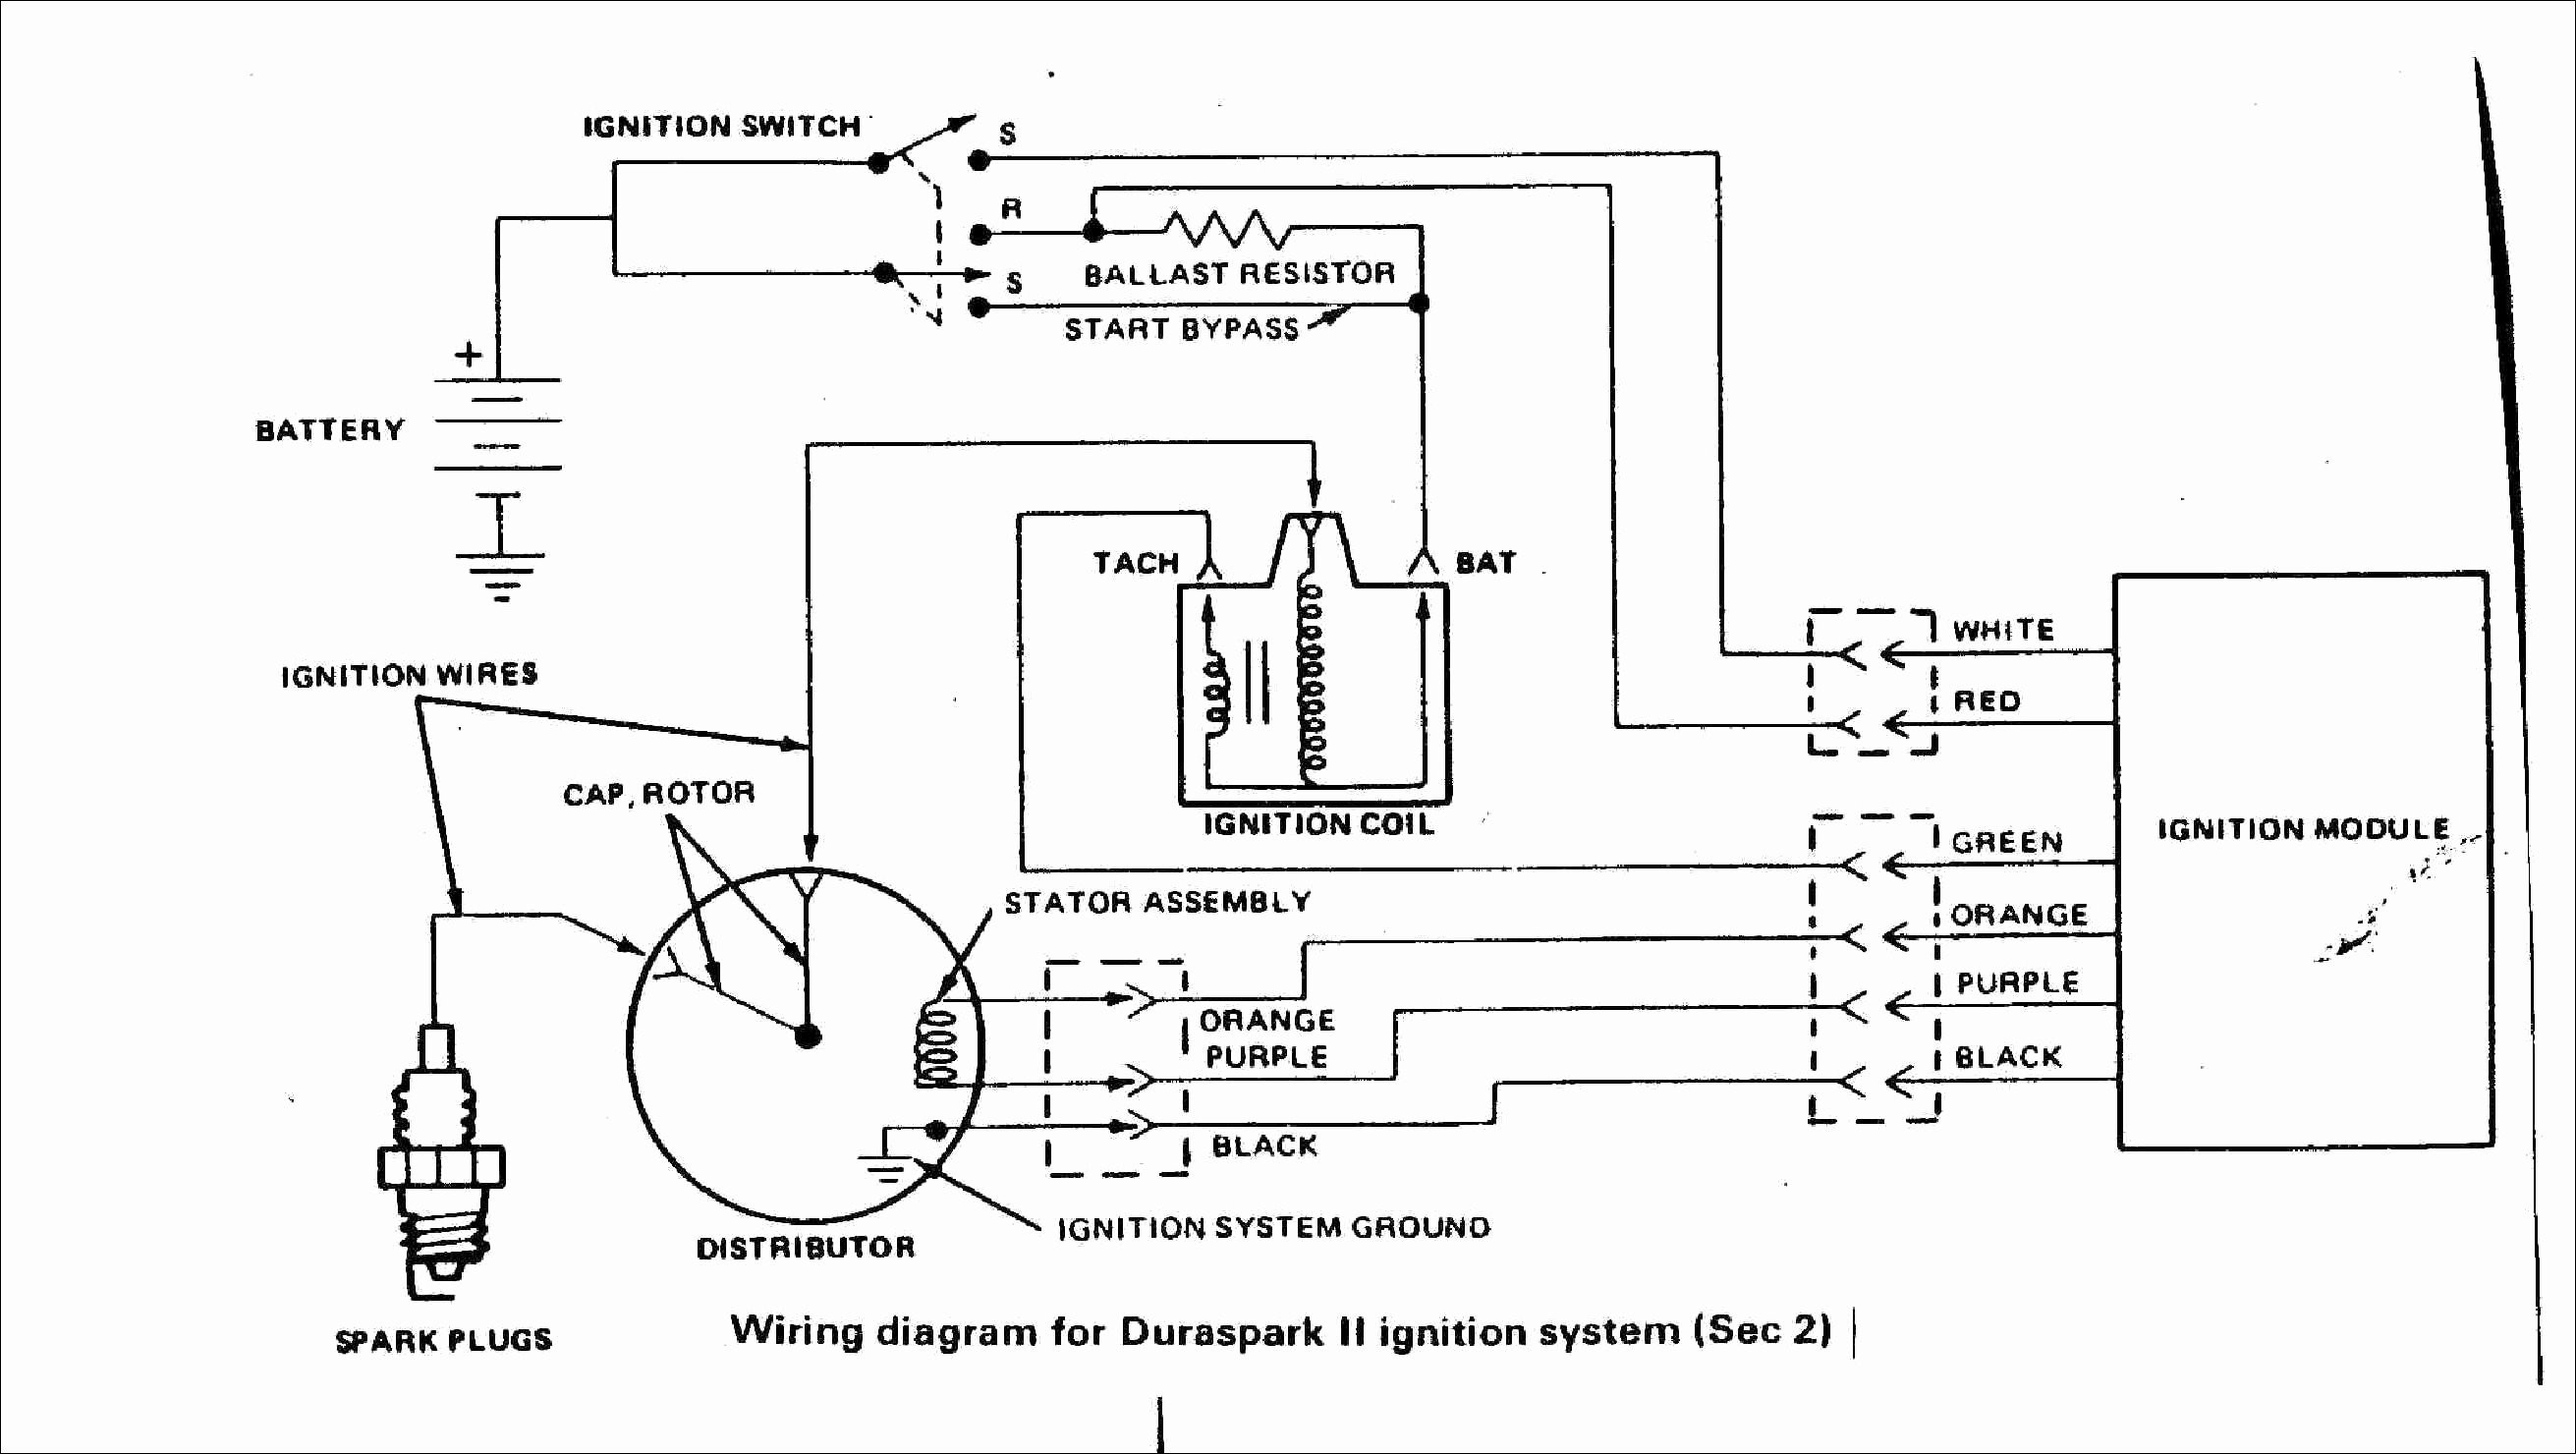 3 Position Ignition Switch Wiring Diagram New Key Barrel Wiring Diagram New 3 Position Ignition Switch